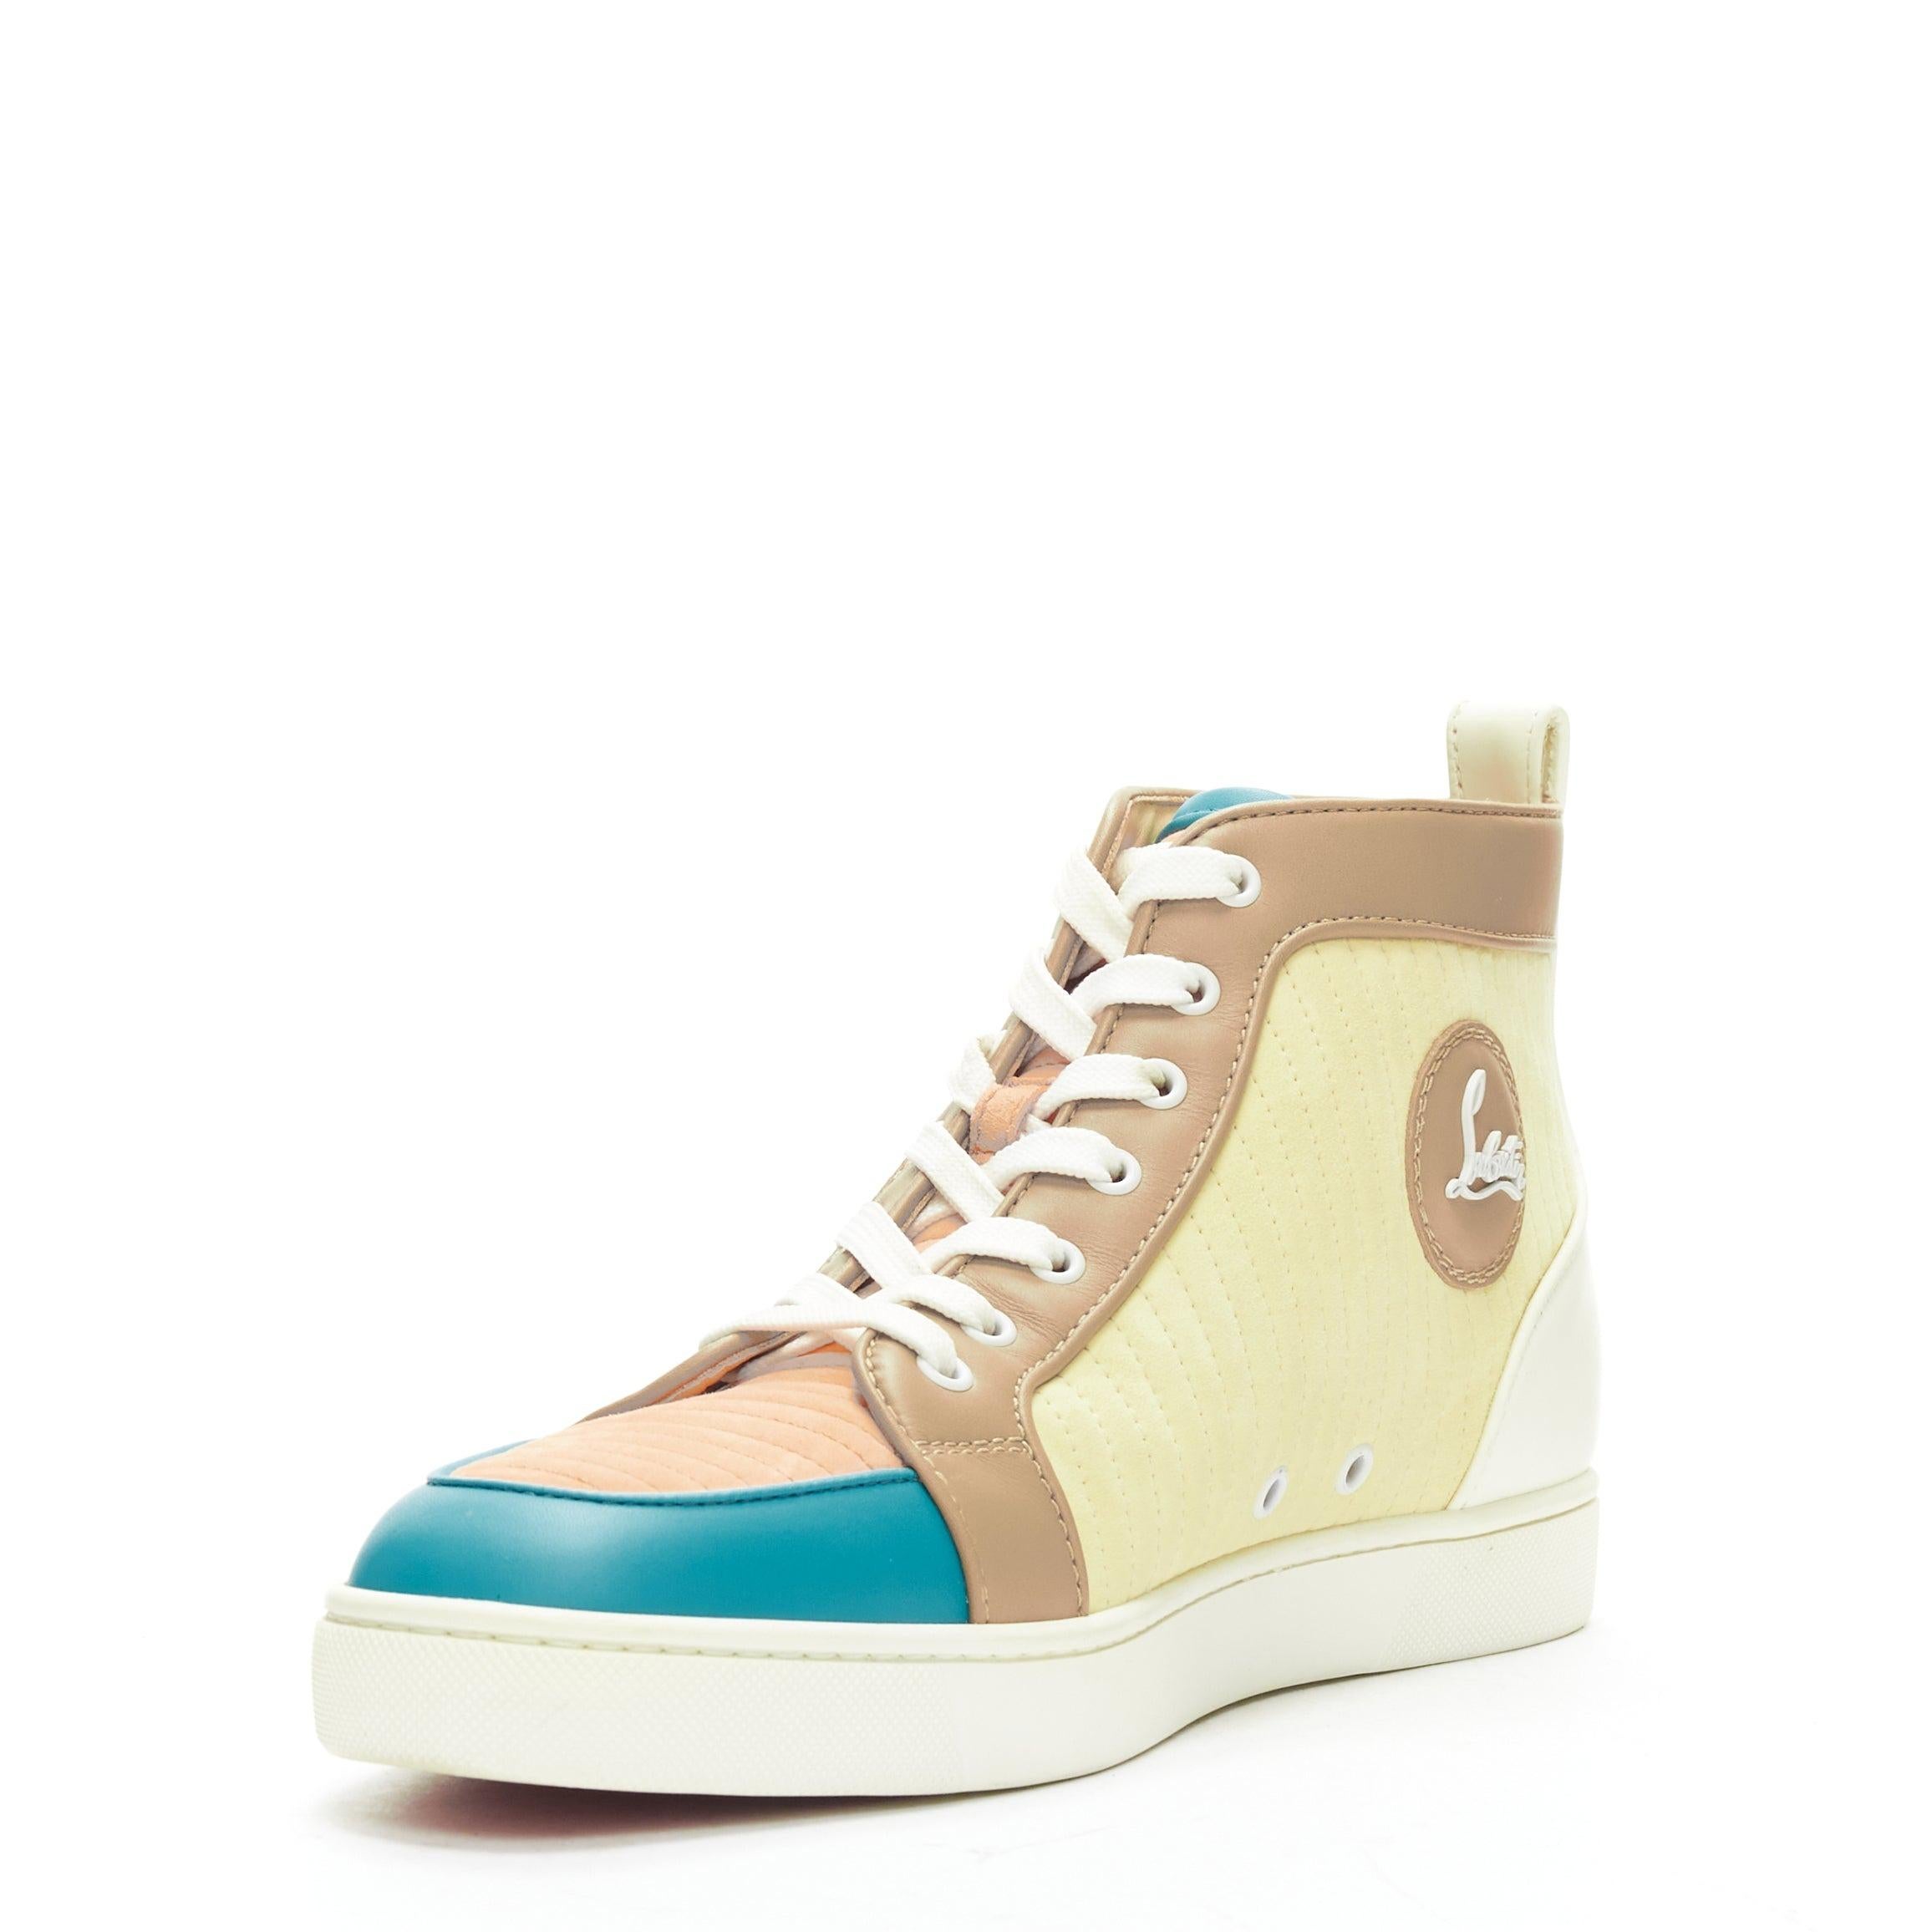 CHRISTIAN LOUBOUTIN Rantus Catach Orlato pastel suede high top sneaker EU42.5 In Good Condition For Sale In Hong Kong, NT